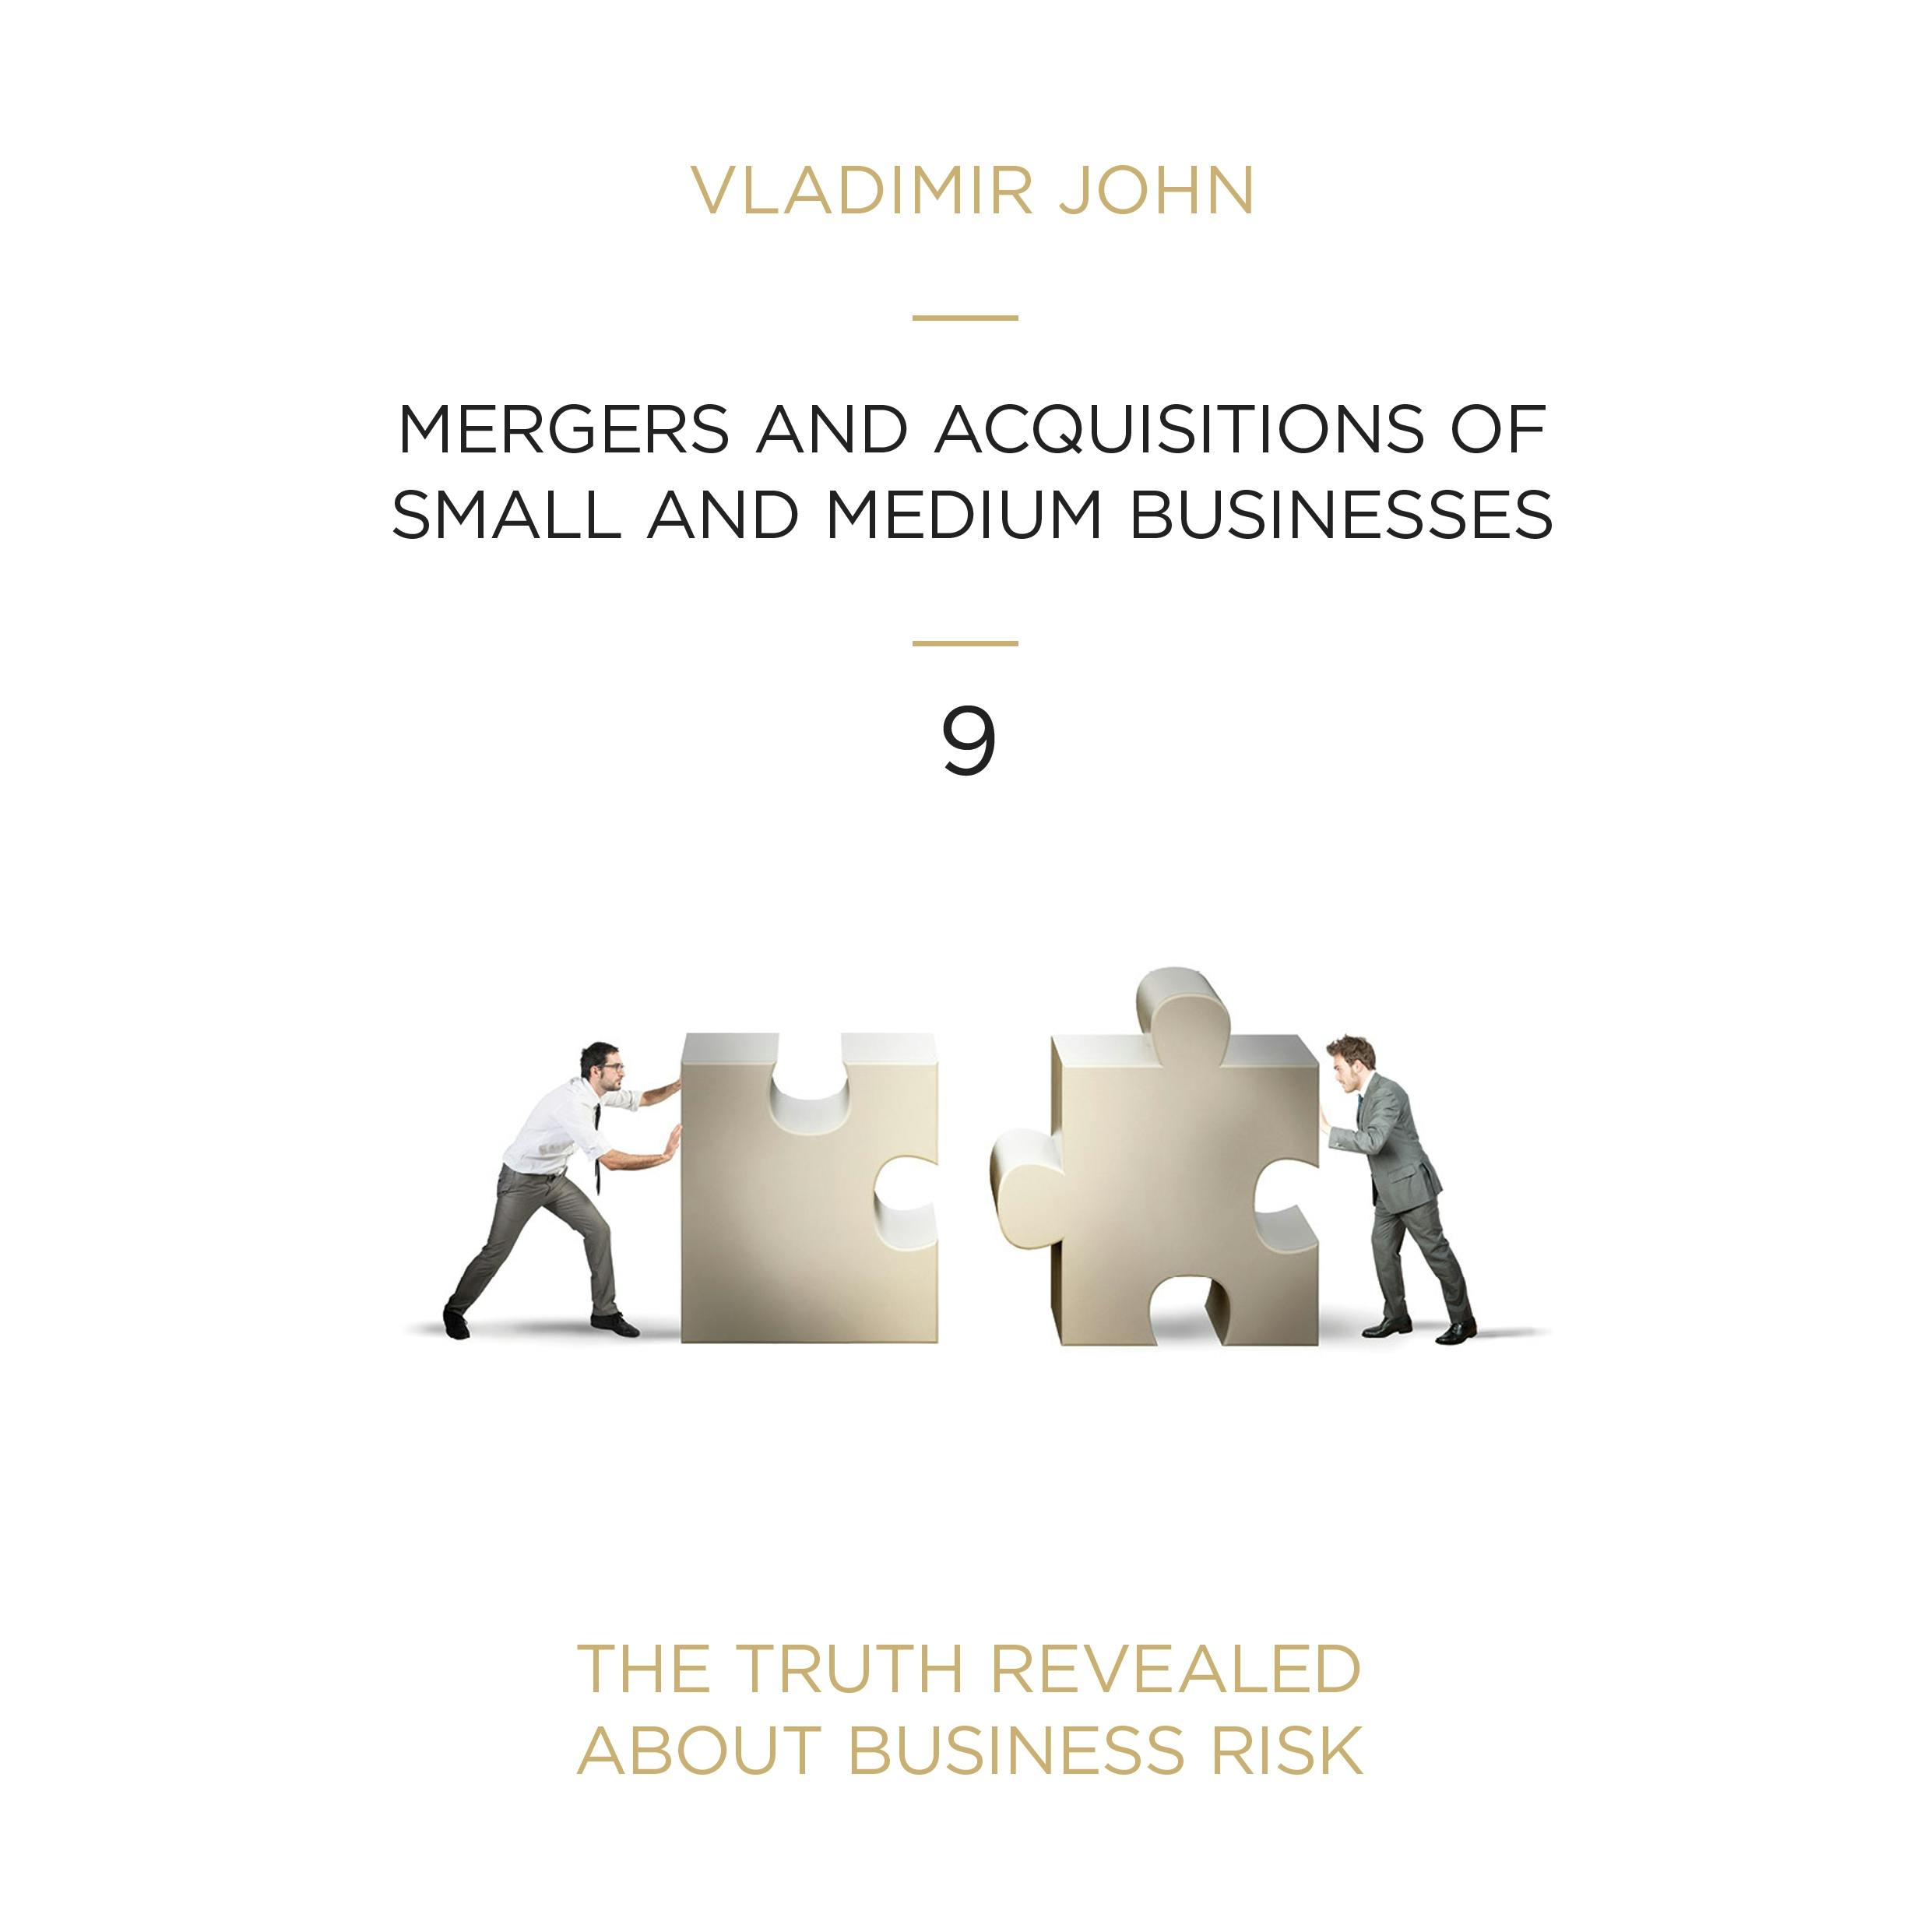 Mergers and Acqusitions of Small and Medium Businesses - undefined